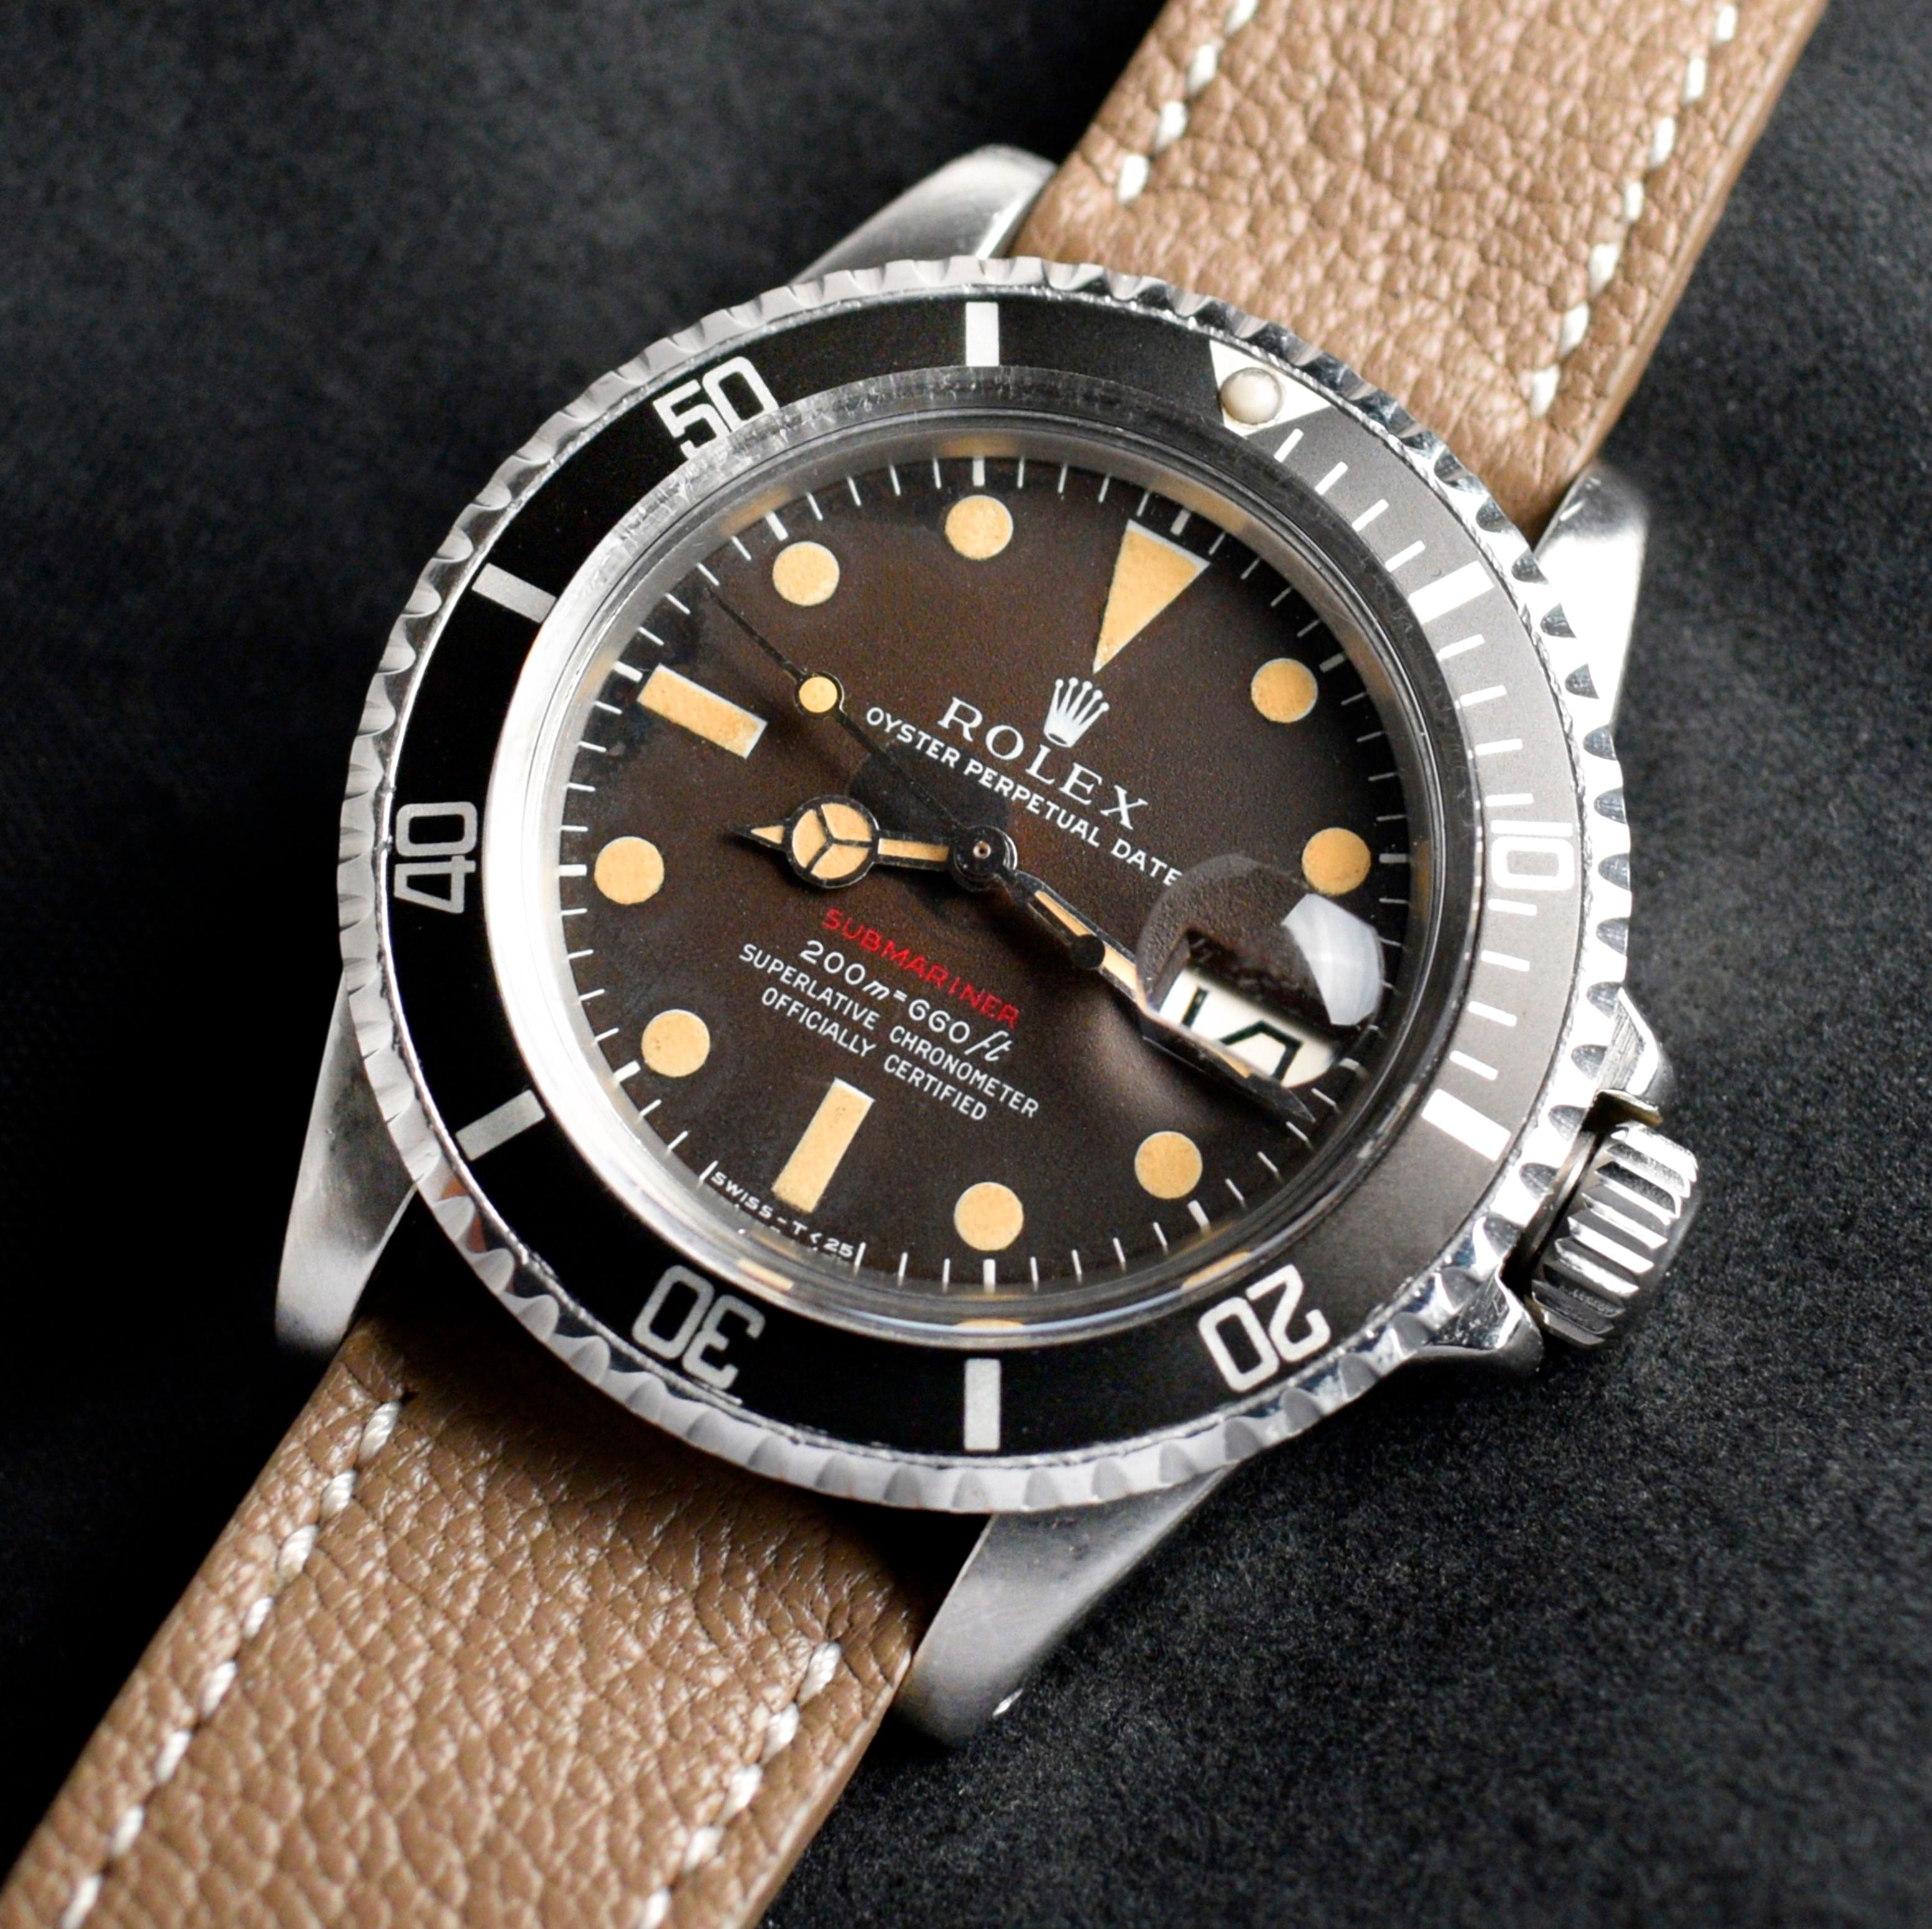 Brand: Vintage Rolex
Model: 1680
Year: 1970
Serial number: 26xxxxx
Reference: OT1595

Case: Show sign of wear with some polishing from previous; inner case back stamped 1680 I 70

Dial: Age Condition Tritium Dial where the dial has turned tropical